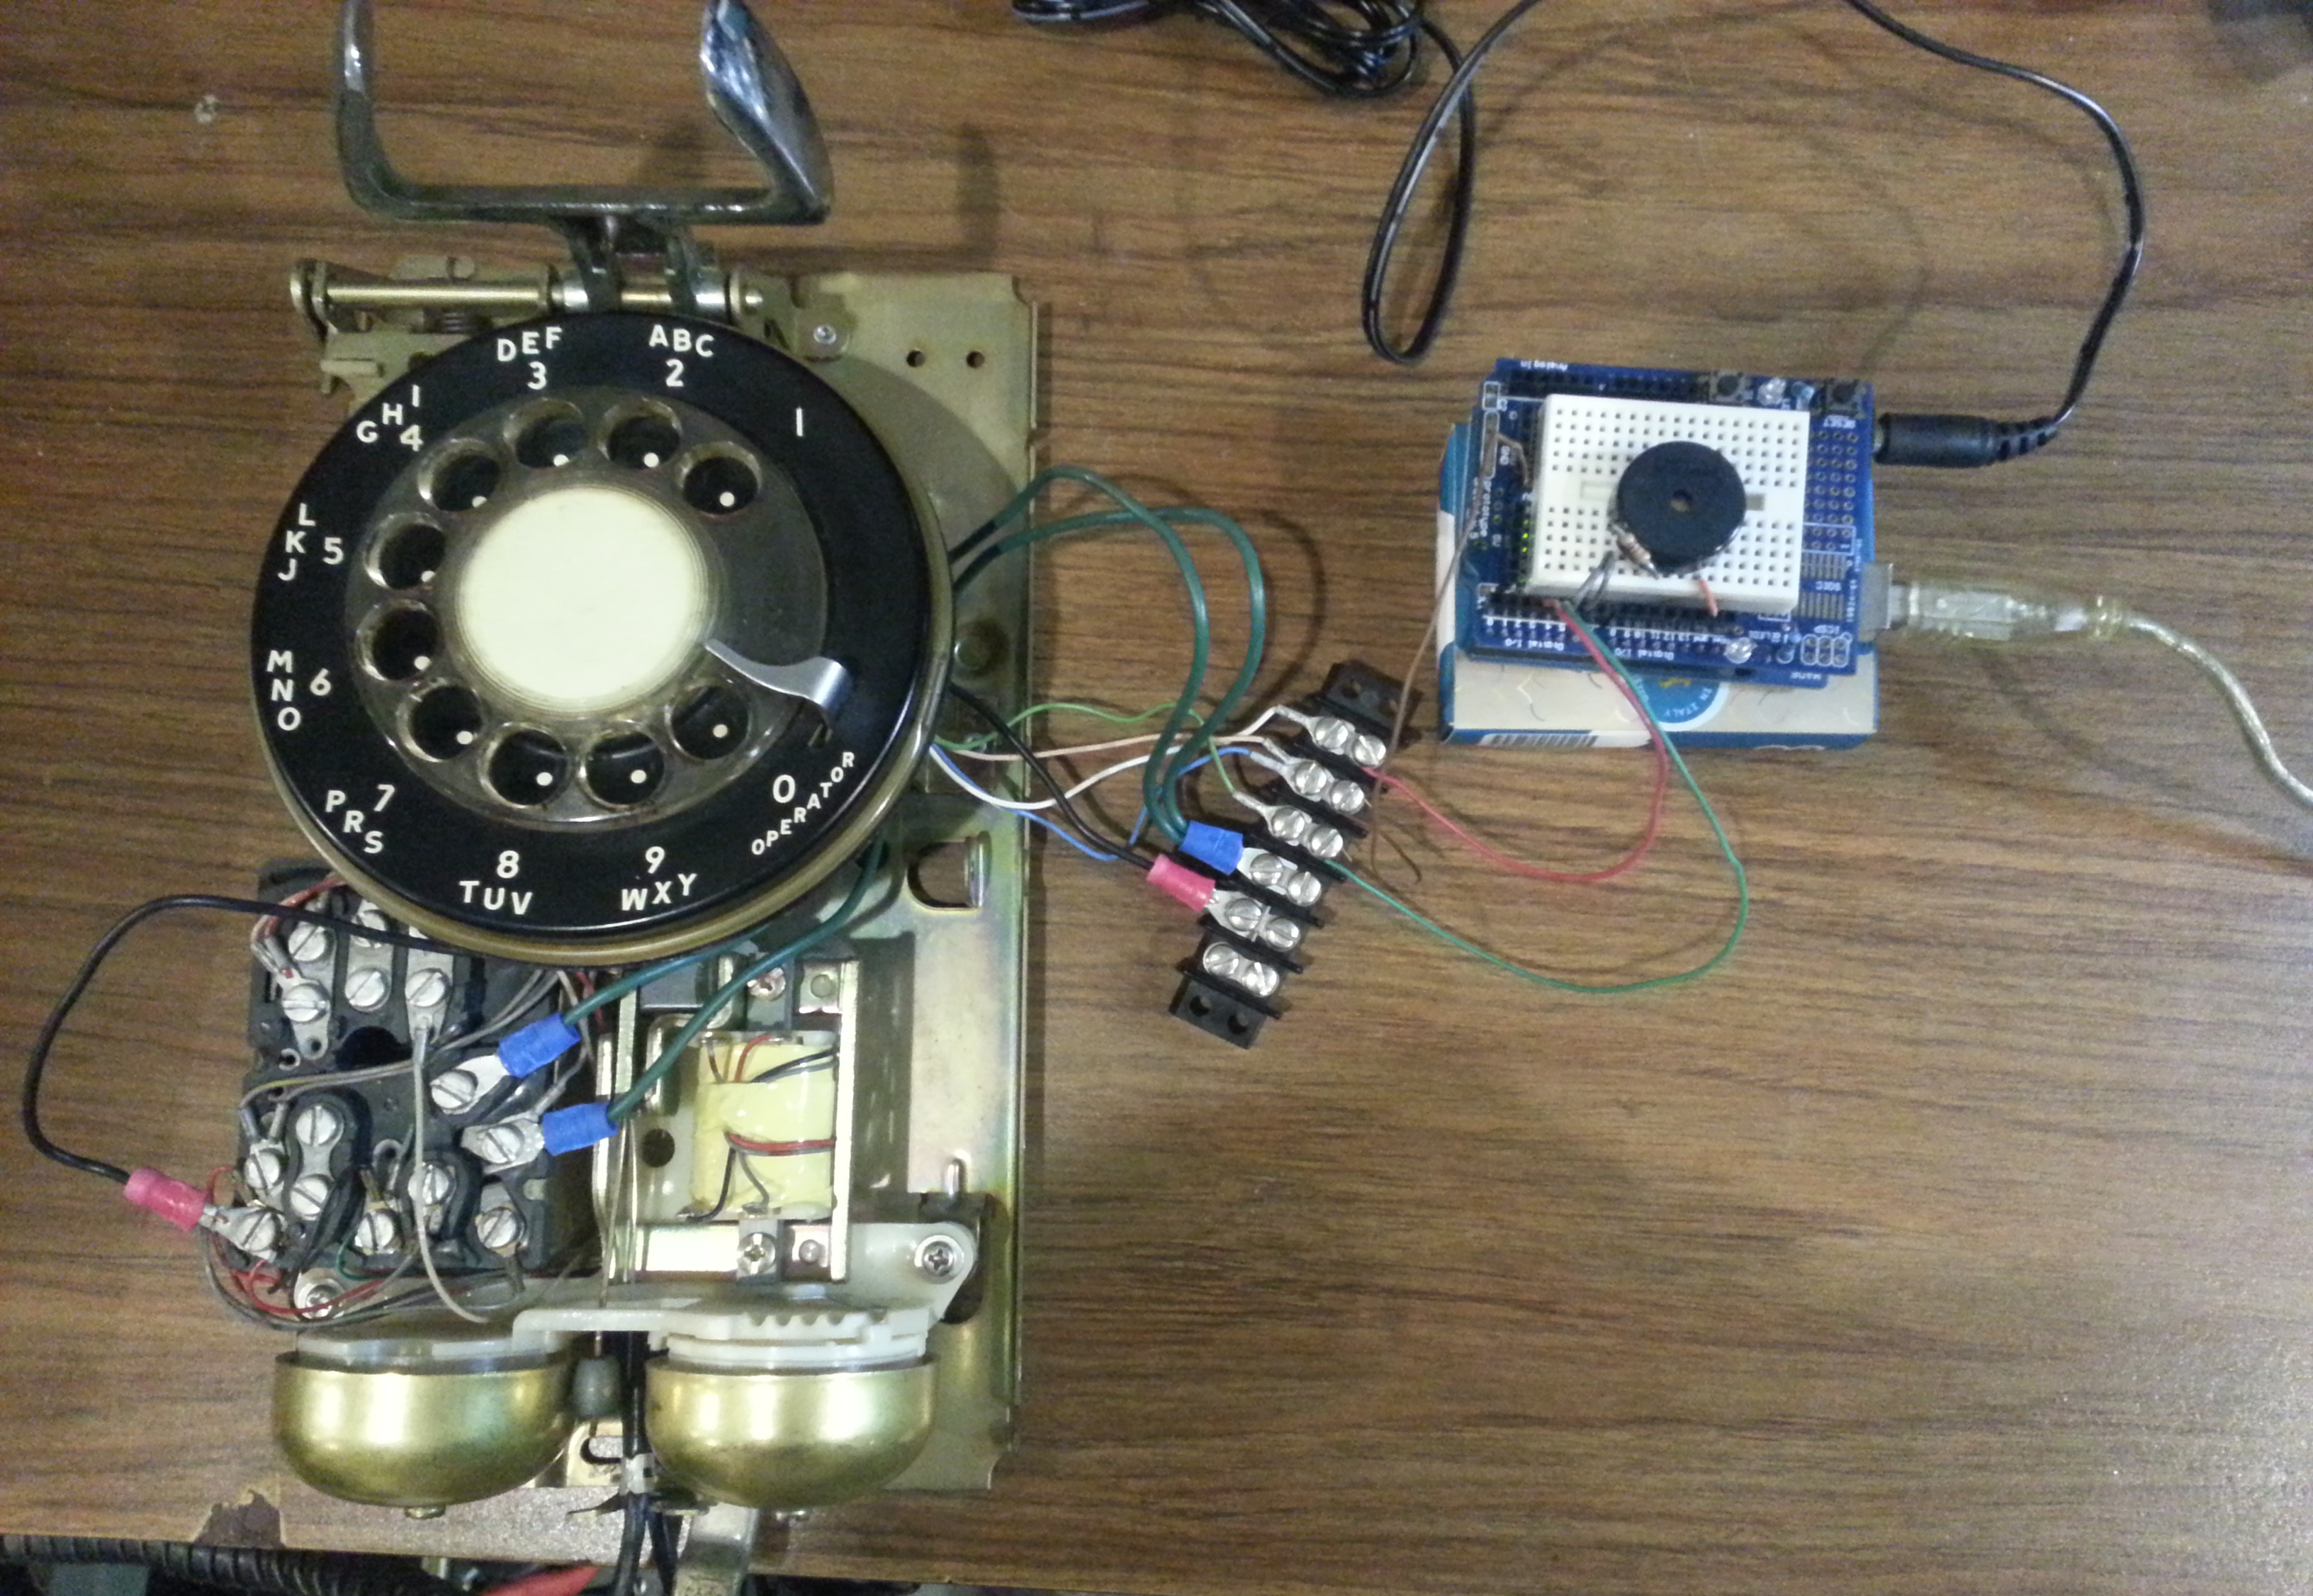 Pic of opened rotary phone with experiment Arduino attached